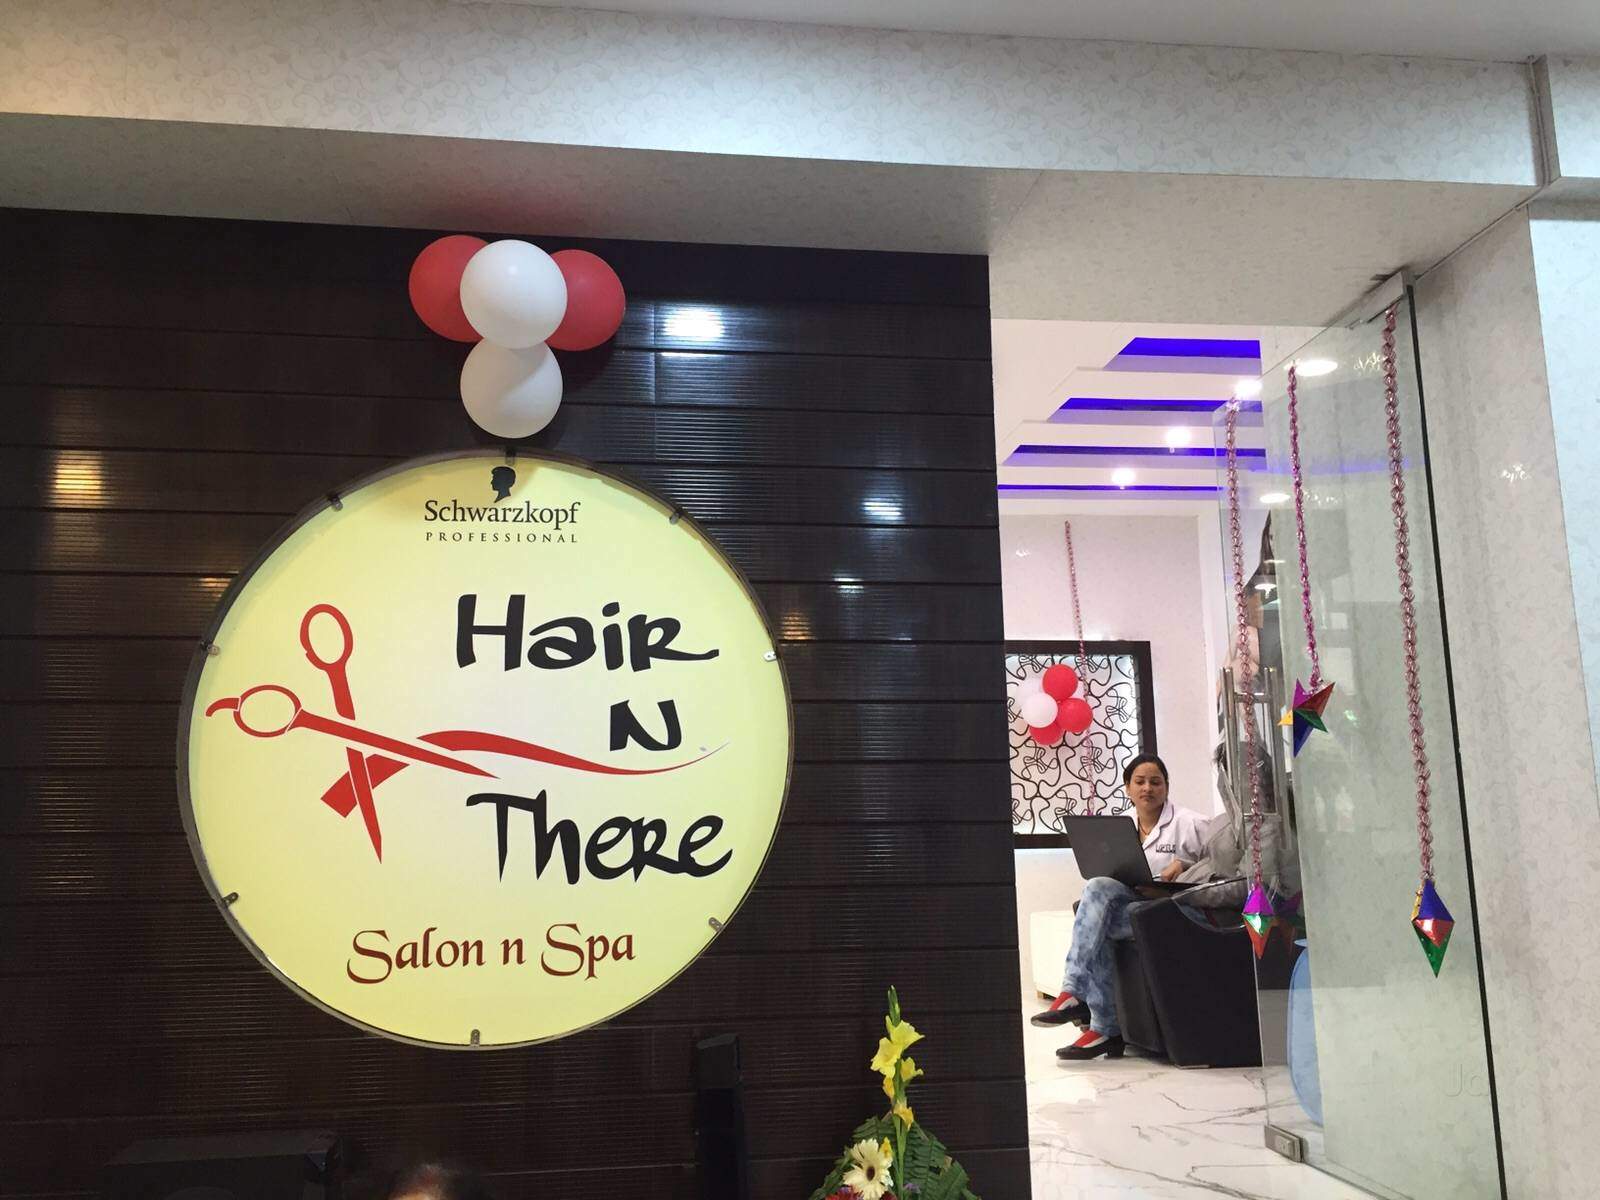 Hair N There Salon and Spa - Civil Lines, Prayagraj (Allahabad) - Reviews,  Fee Structure, Admission Form, Address, Contact, Rating - Directory